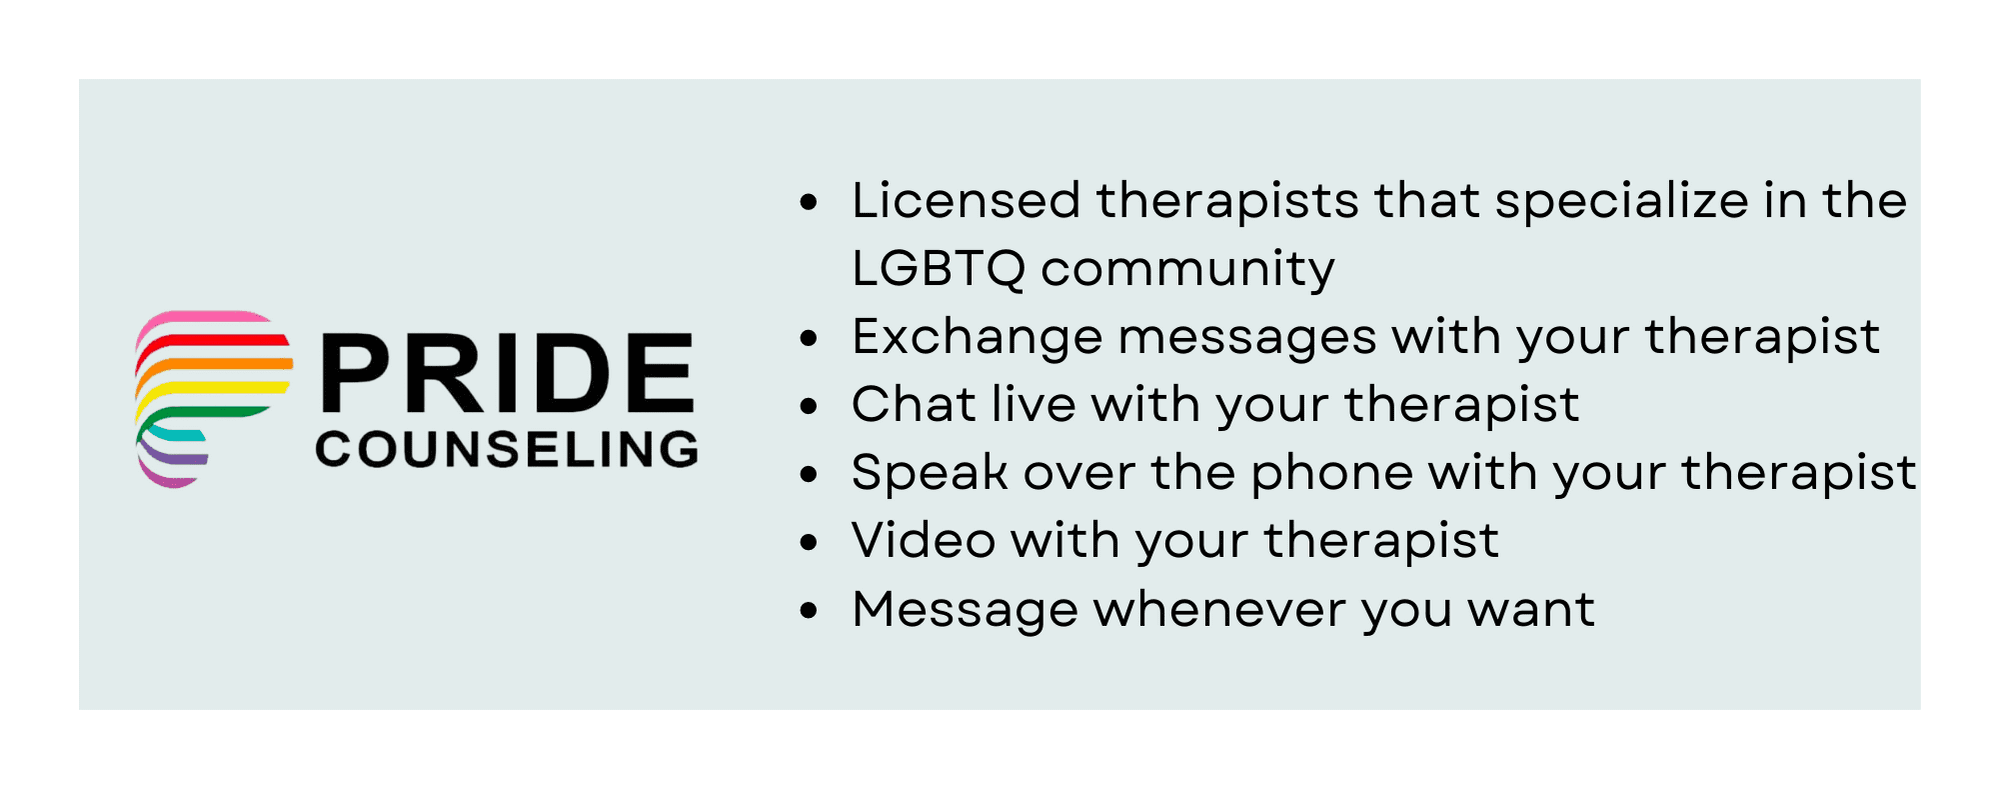 pride counseling